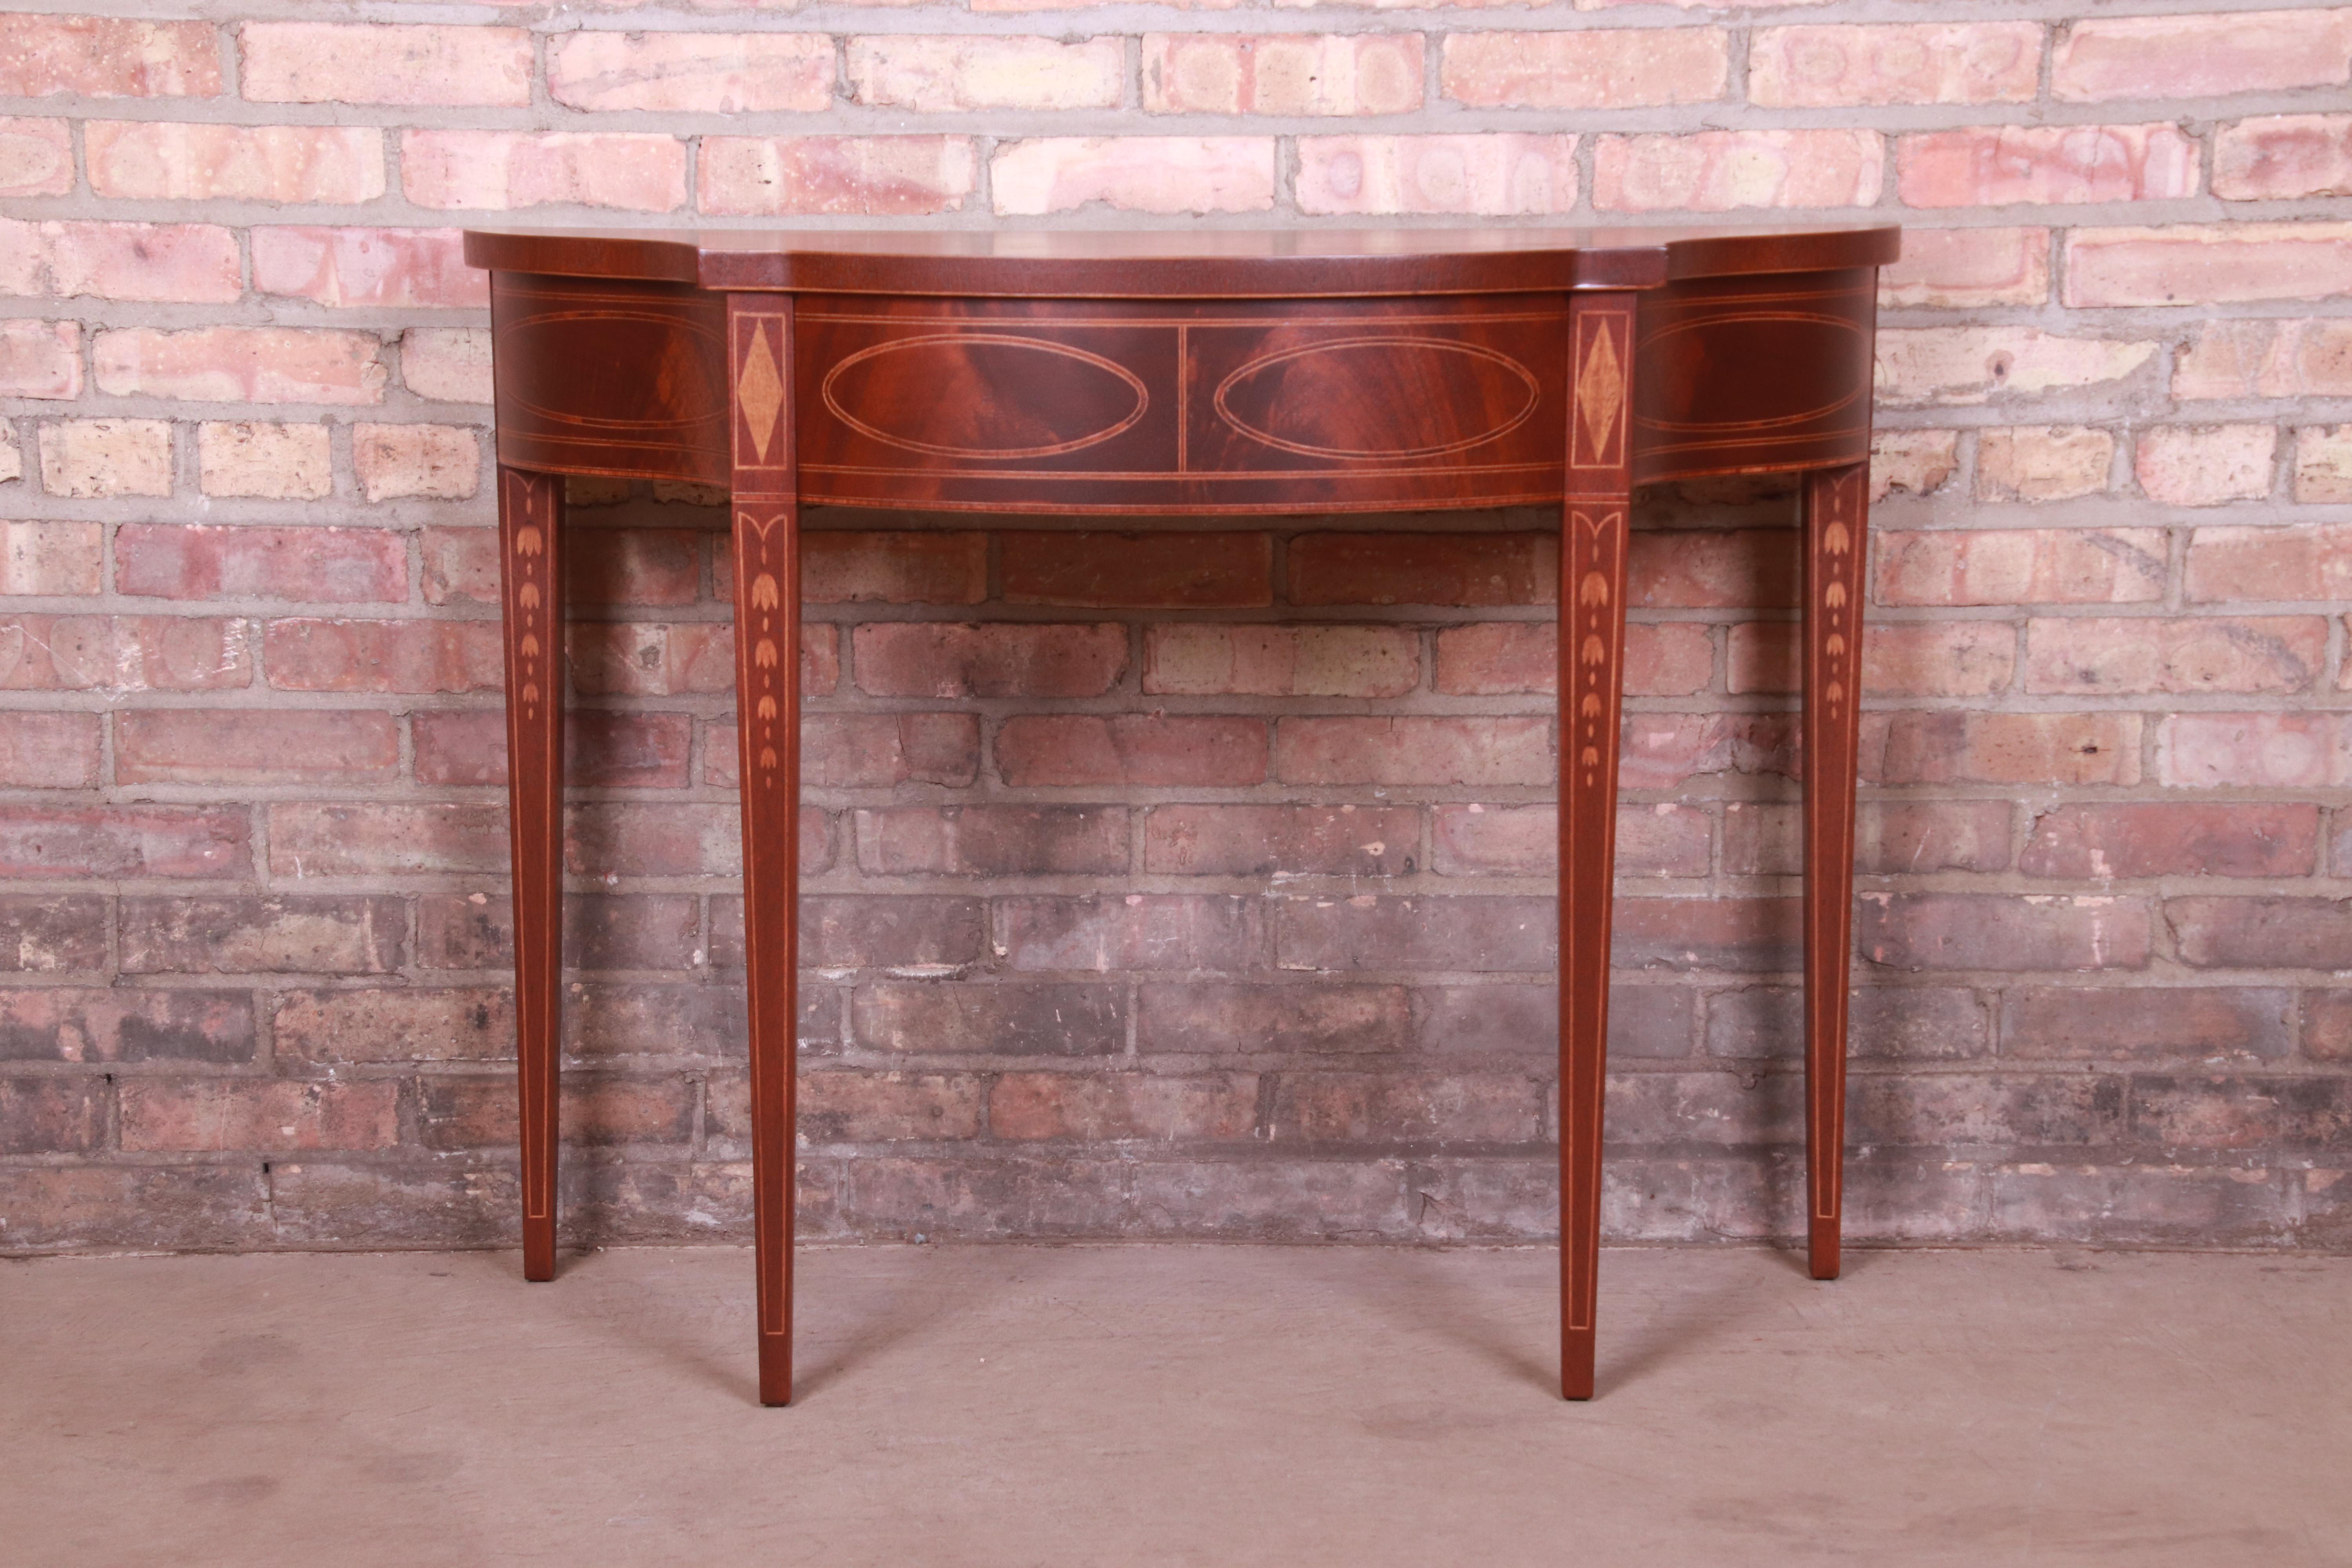 A gorgeous Federal or Hepplewhite style console or entry table

By Baker Furniture, 